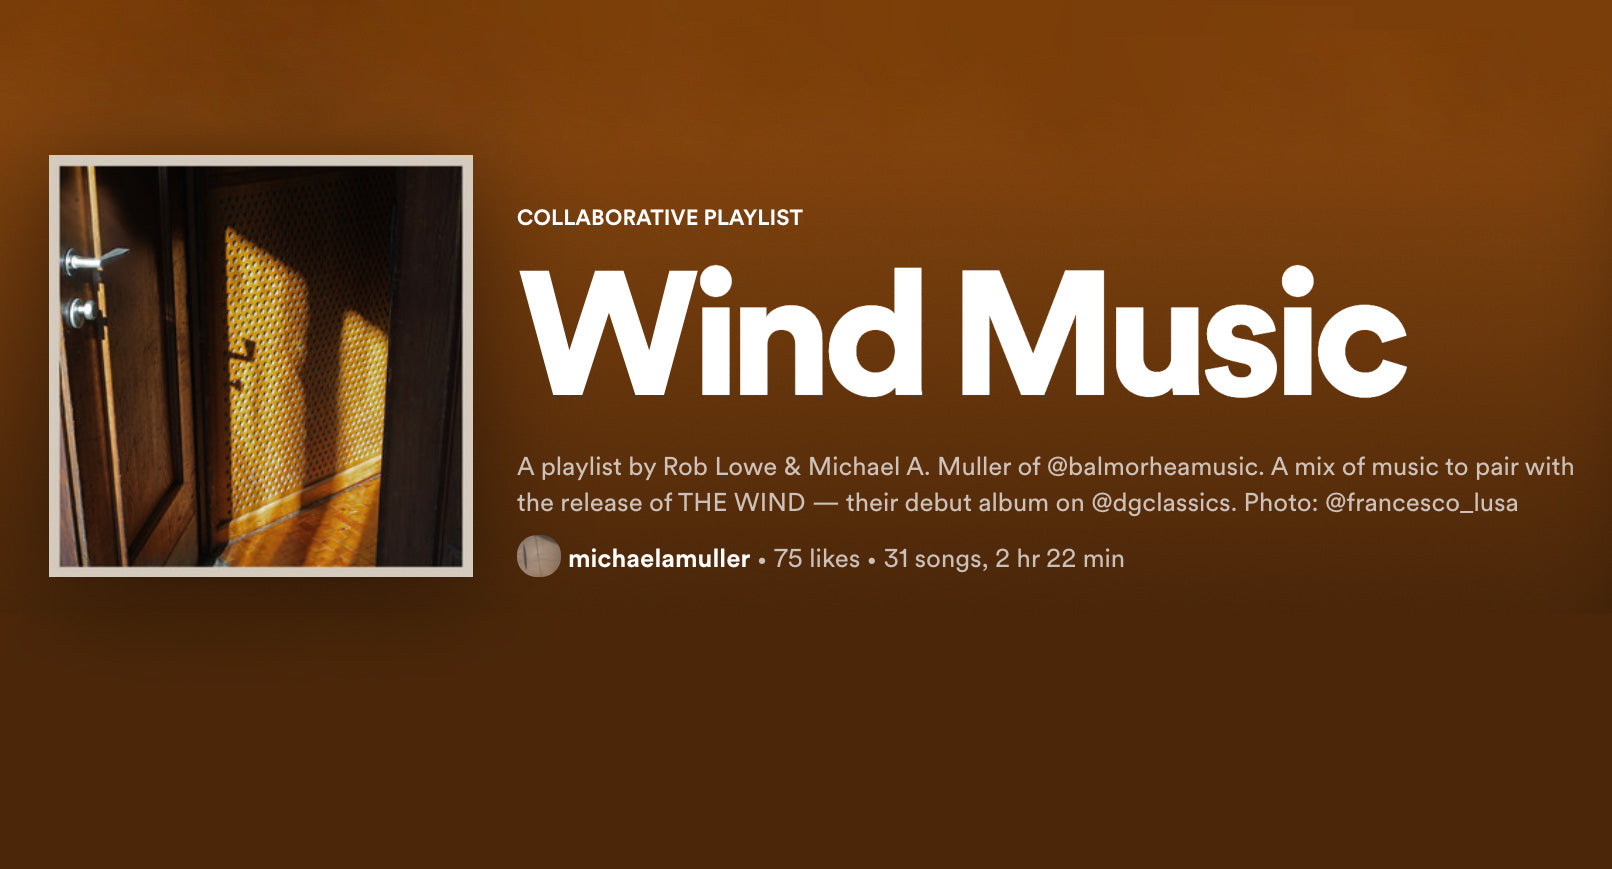 Wind Music: A Playlist by Rob Lowe & Michael A. Muller of Balmorhea Music